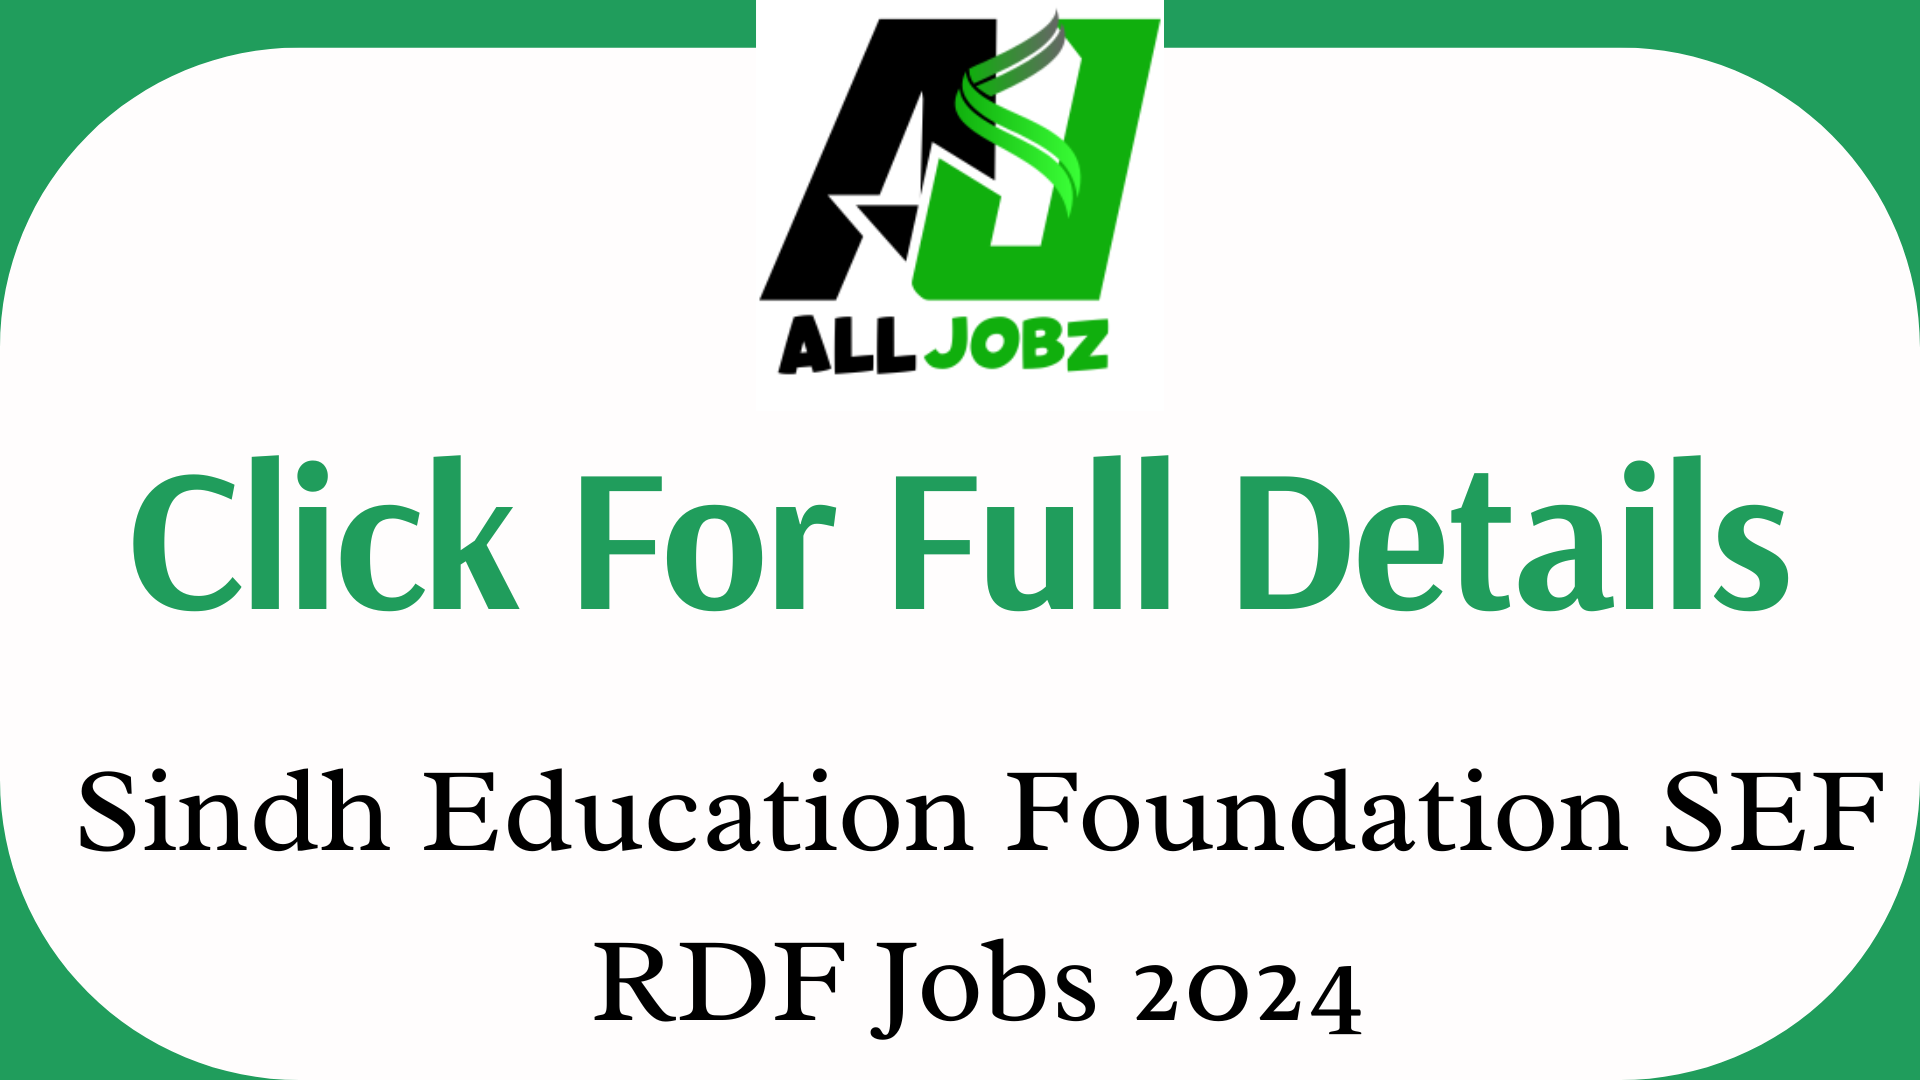 Sindh Education Foundation Teaching And Non Teaching Positions 2024, Sindh Education Foundation Teaching And Non Teaching Positions 2024 Result, Sindh Education Foundation Teaching And Non Teaching Positions 2024 Online, Sindh Education Foundation Teaching And Non Teaching Positions 2024 Last, Sindh Education Foundation Teaching And Non Teaching Positions 2024 Sindh, Sindh Education Foundation Sef Jobs 2024 Salary, Www.sef.org.pk 2024, Sindh Education Foundation Sef Jobs 2024 Last Date, Sindh Education Foundation Sef Jobs 2024 Result, Sindh Education Foundation Sef Jobs 2024 Apply Online, Sindh Education Foundation Sef Jobs 2024 Karachi,